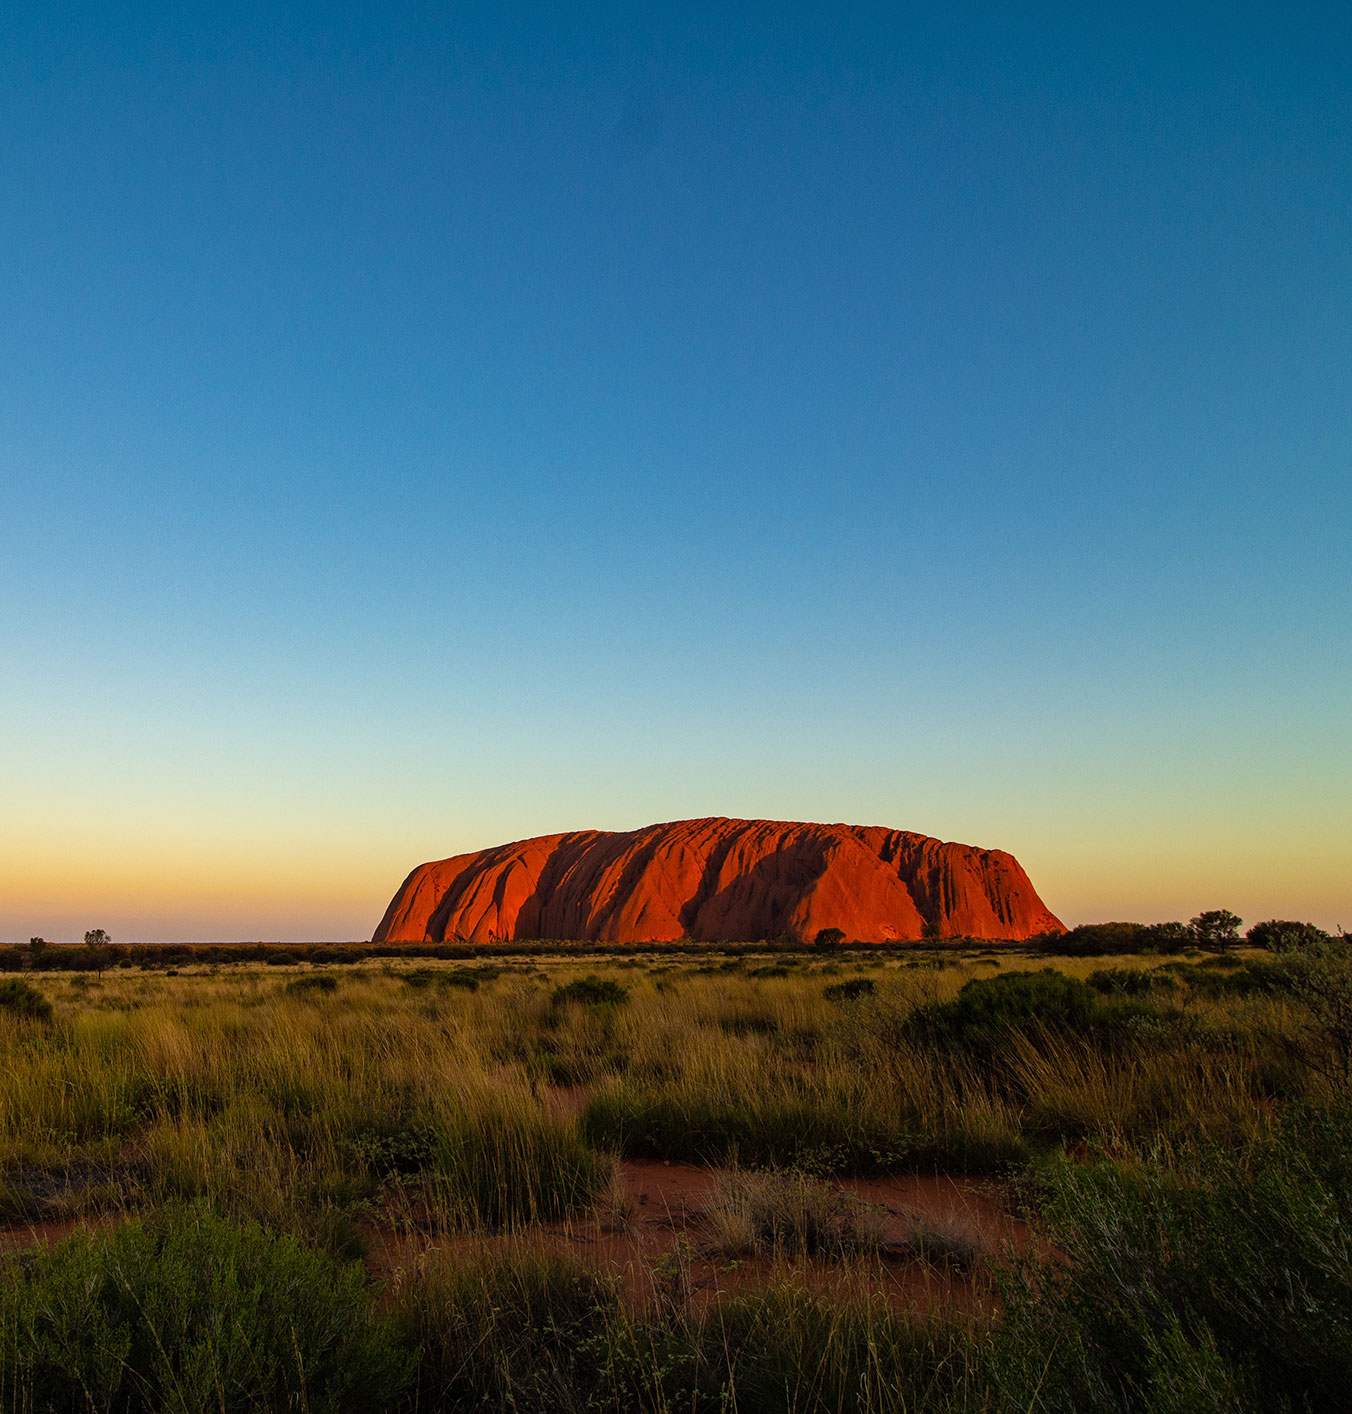 A love letter to Australia: wild, inspiring and forever friendly